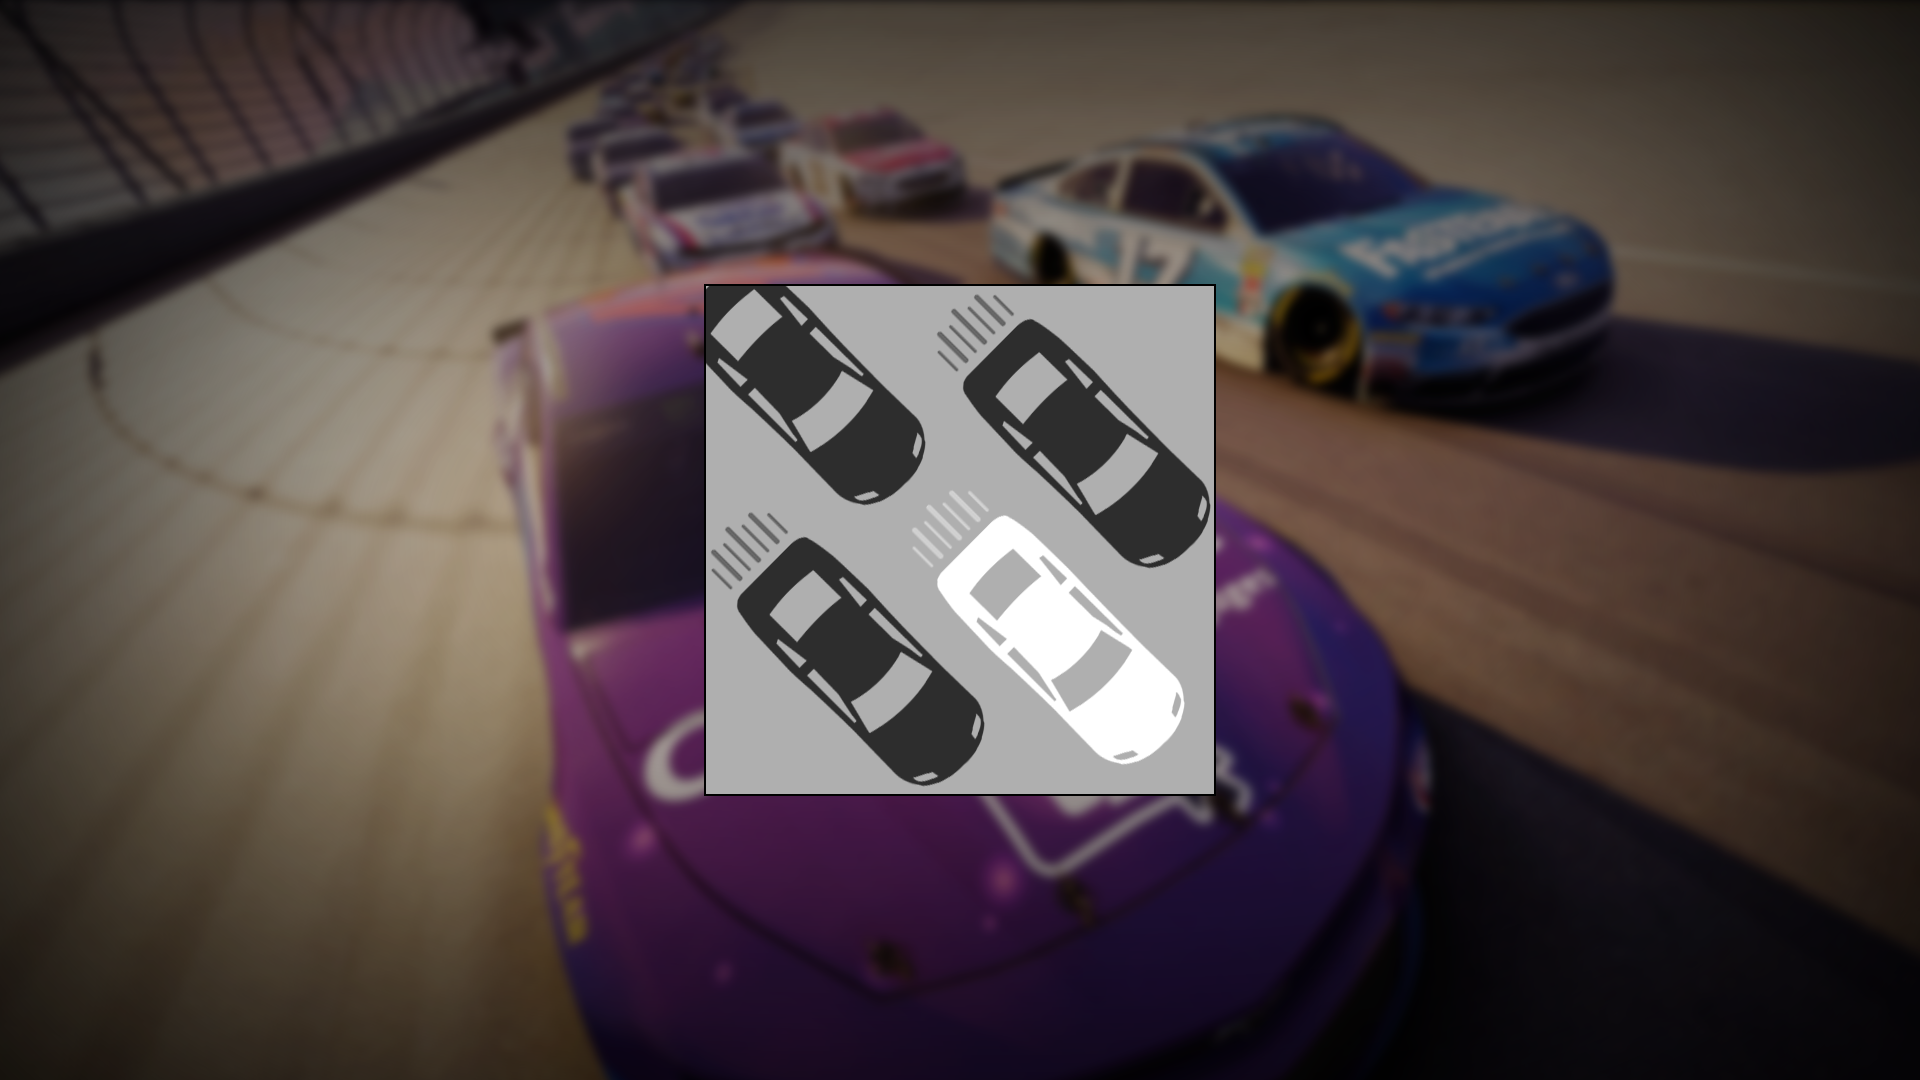 Icon for Online Racer